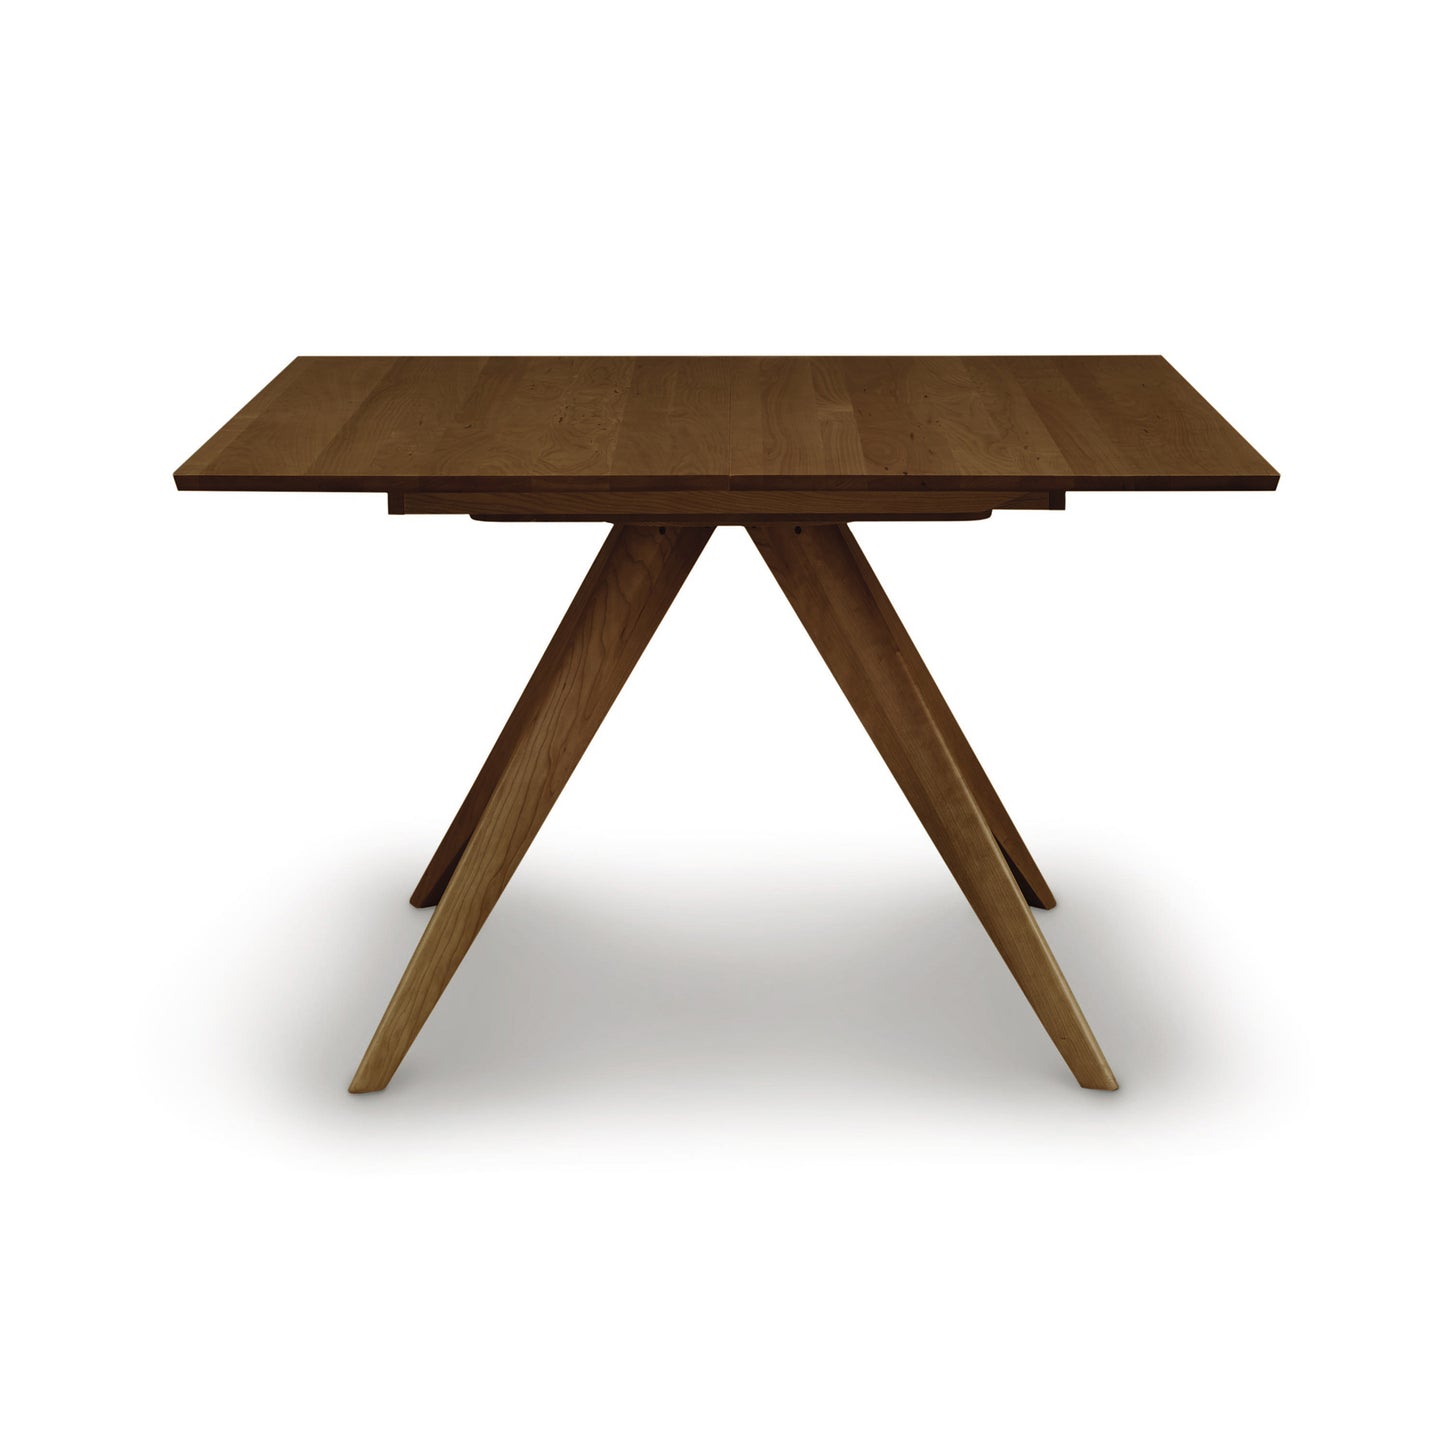 A square table with wooden legs and a square top.